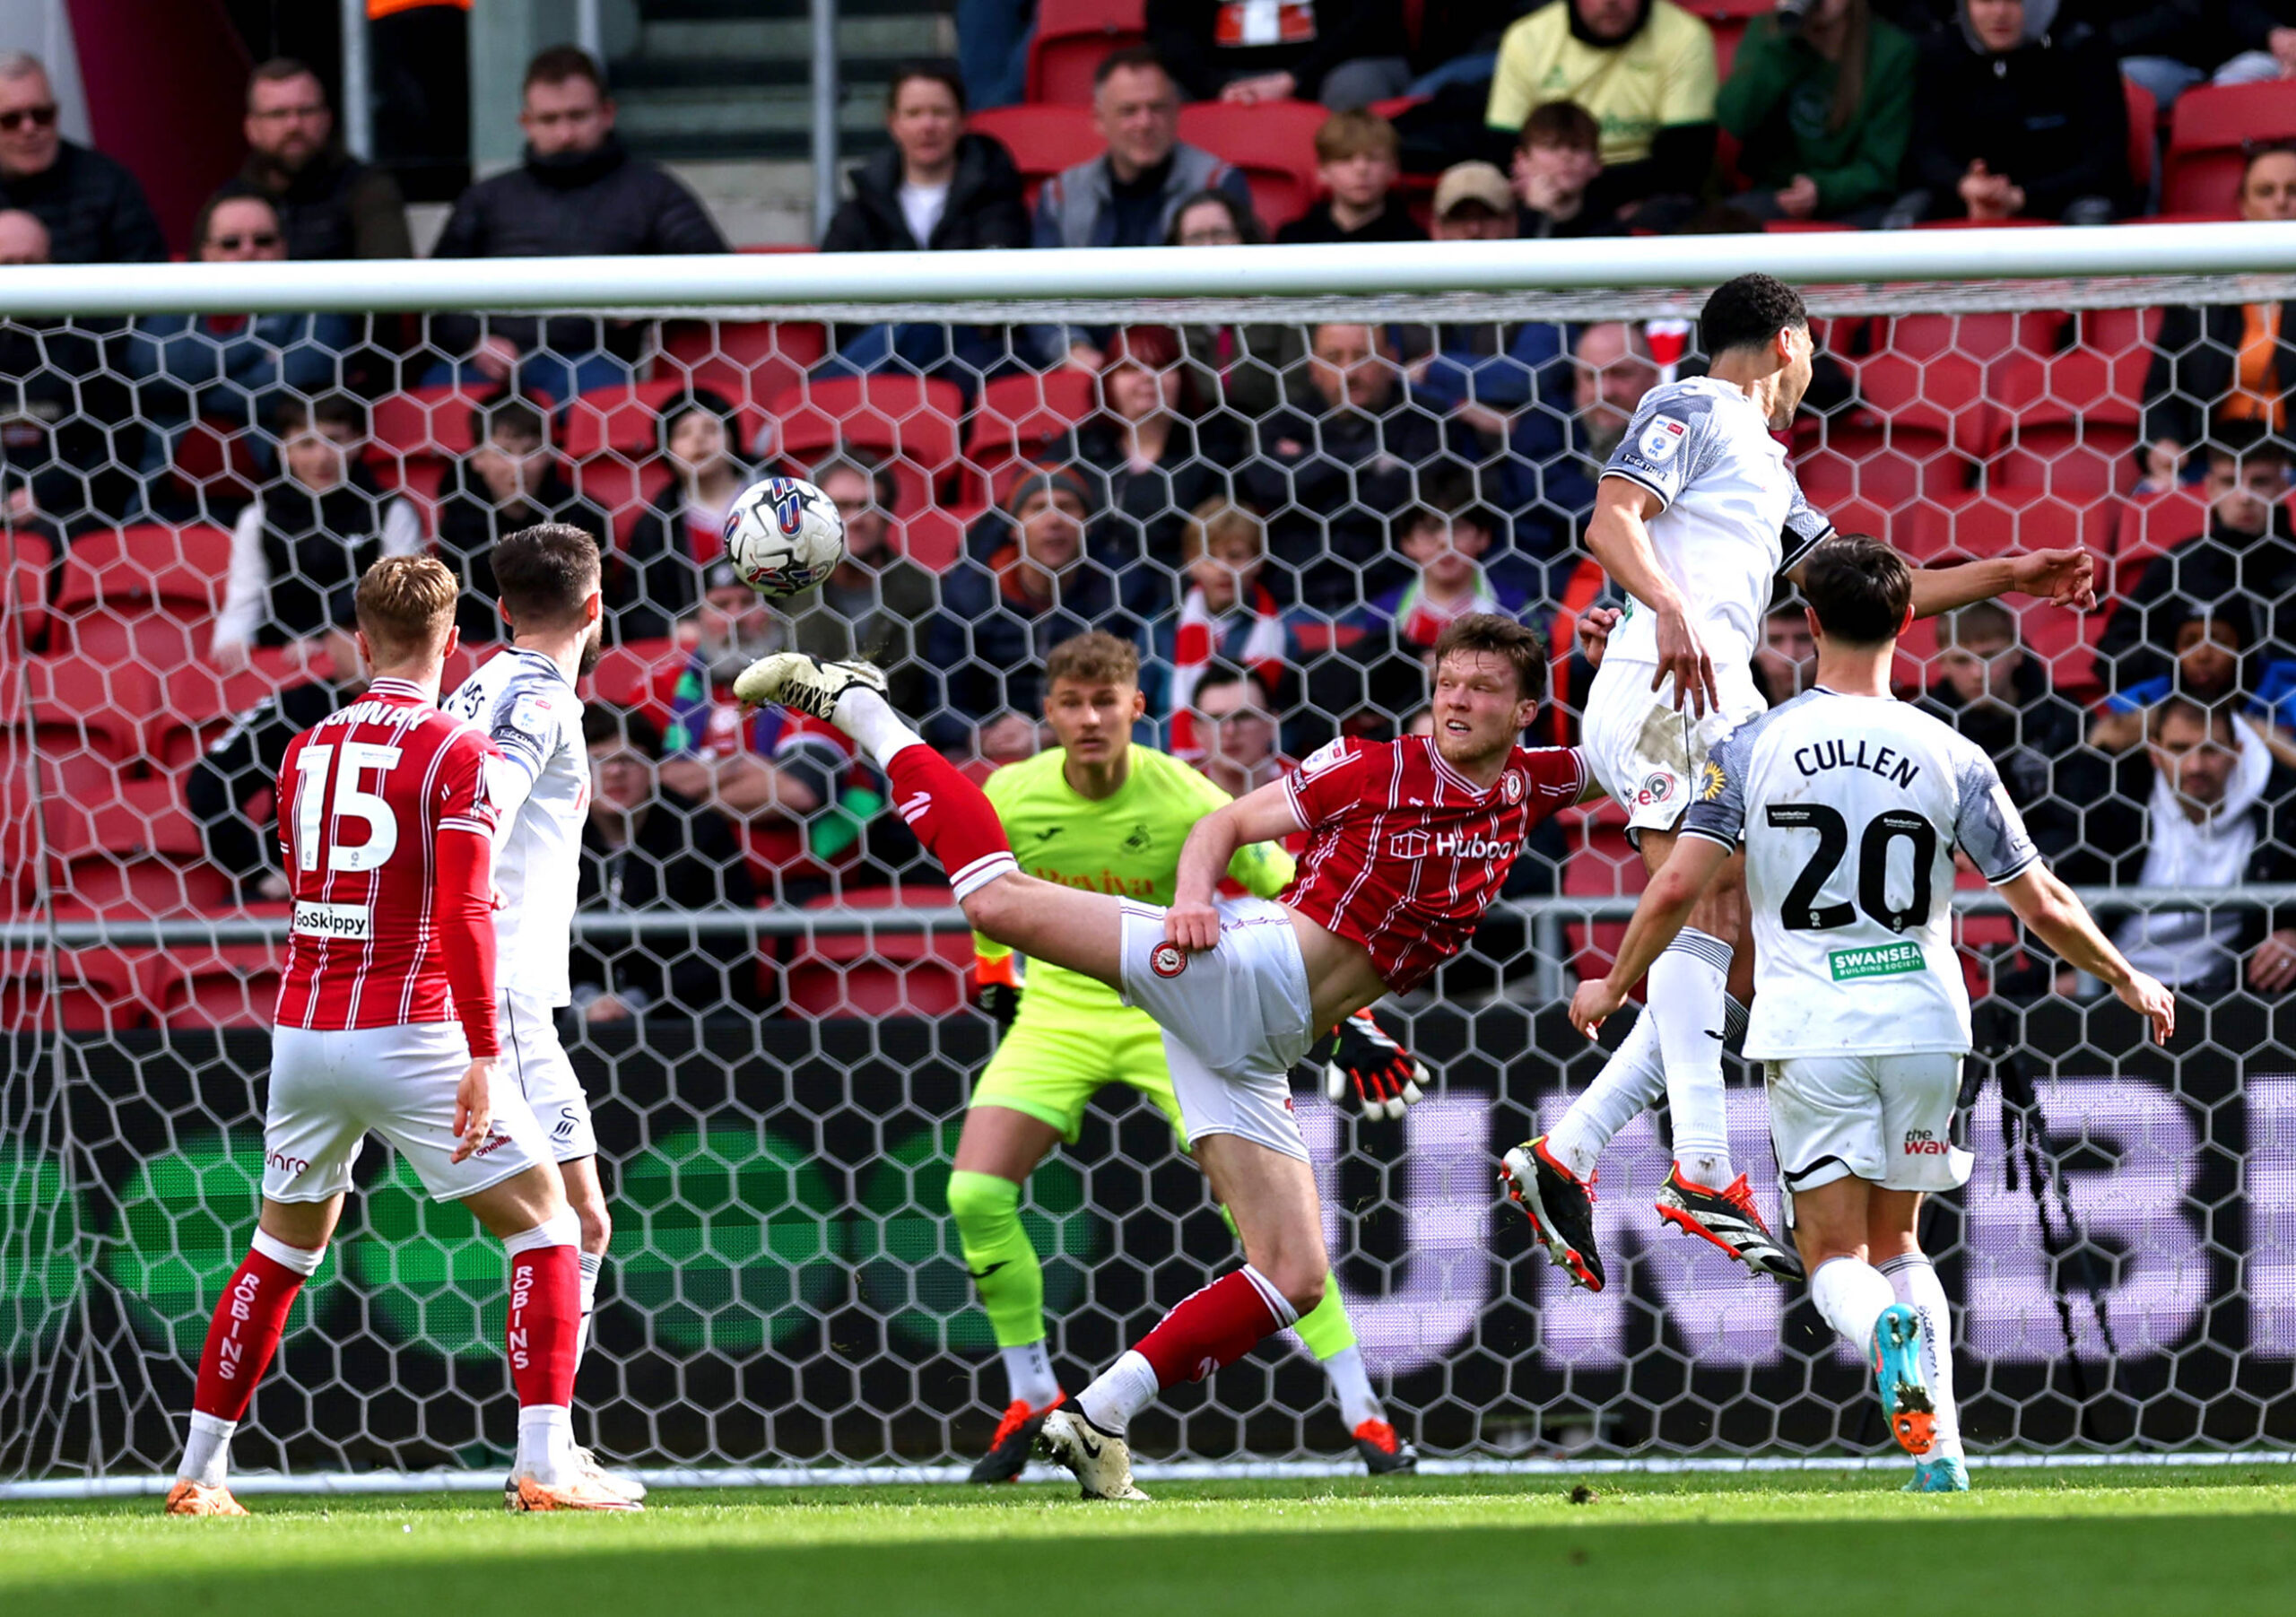 Bristol City defender stretches to block headed attempt by Swansea player